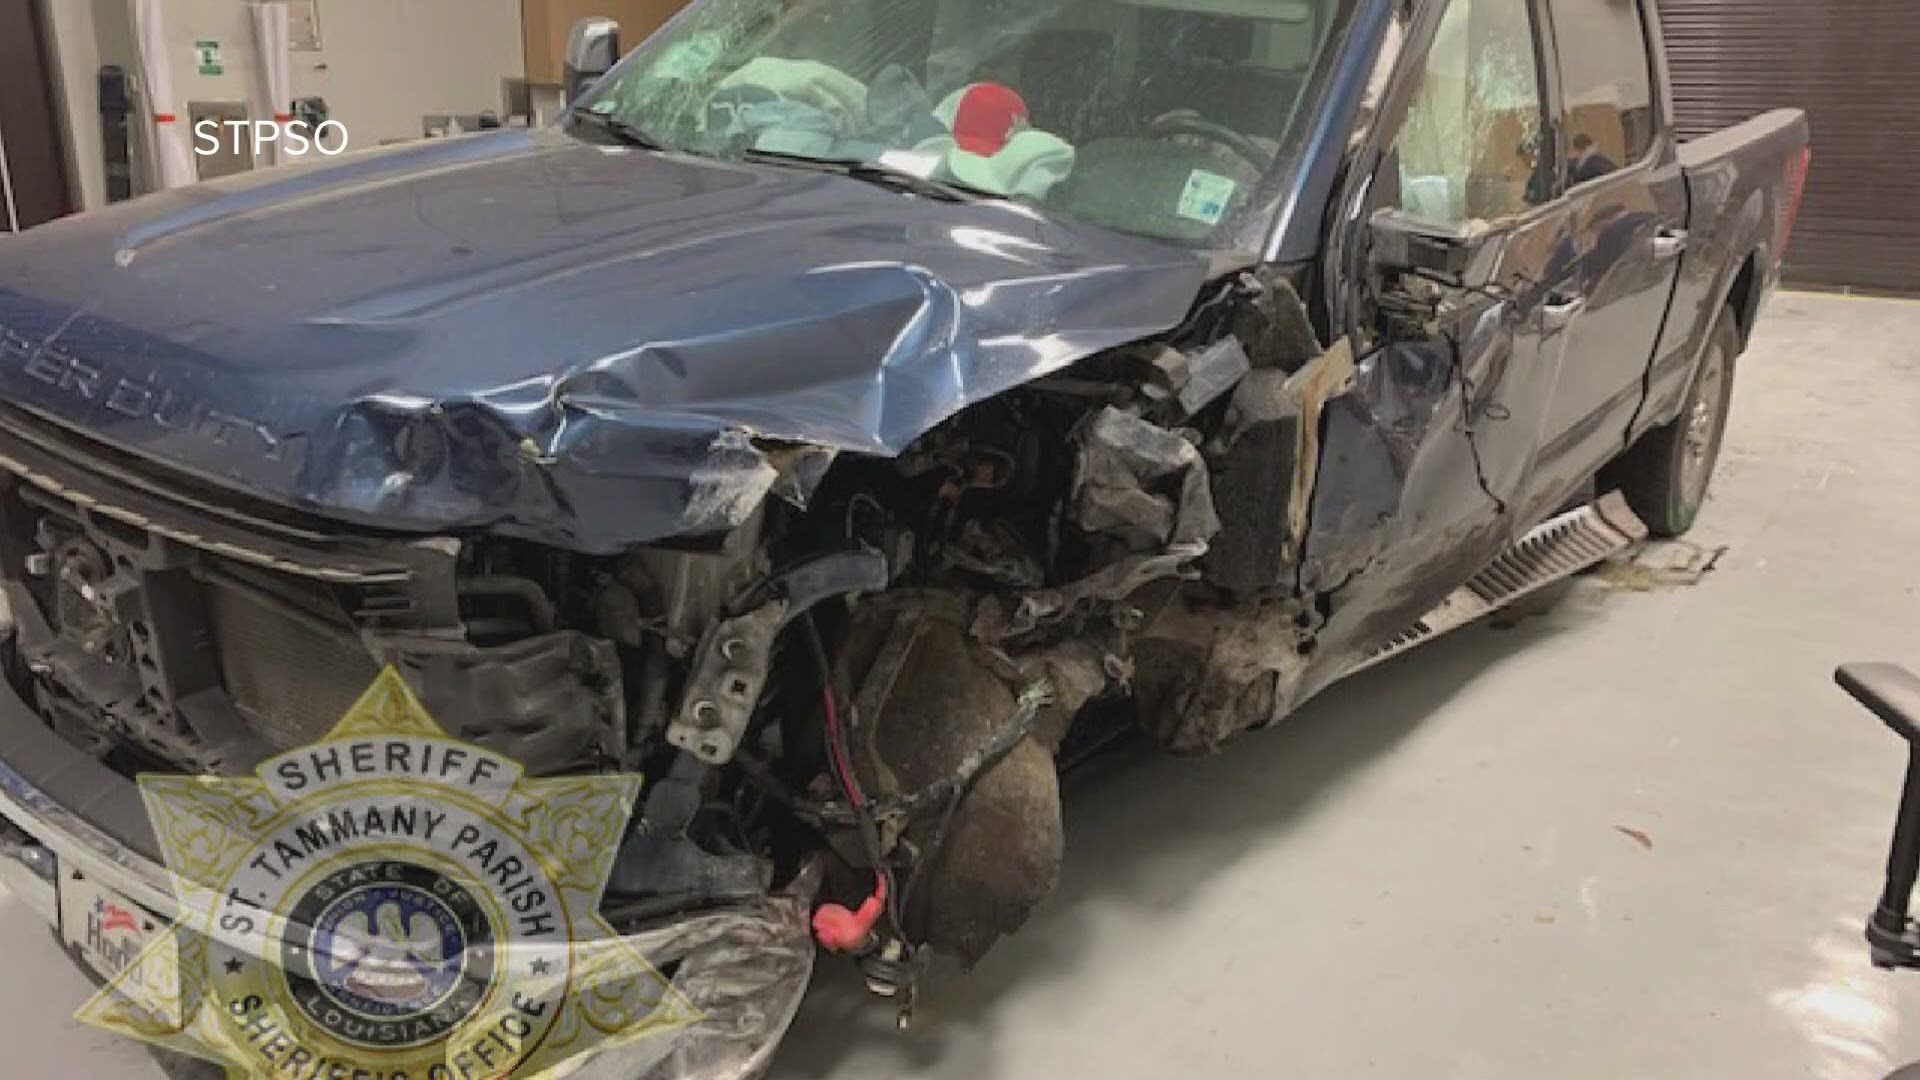 The St. Tammany Parish Sheriff's Office says an arrest has been made in the hit and run crash that left a man dead and a child hospitalized.